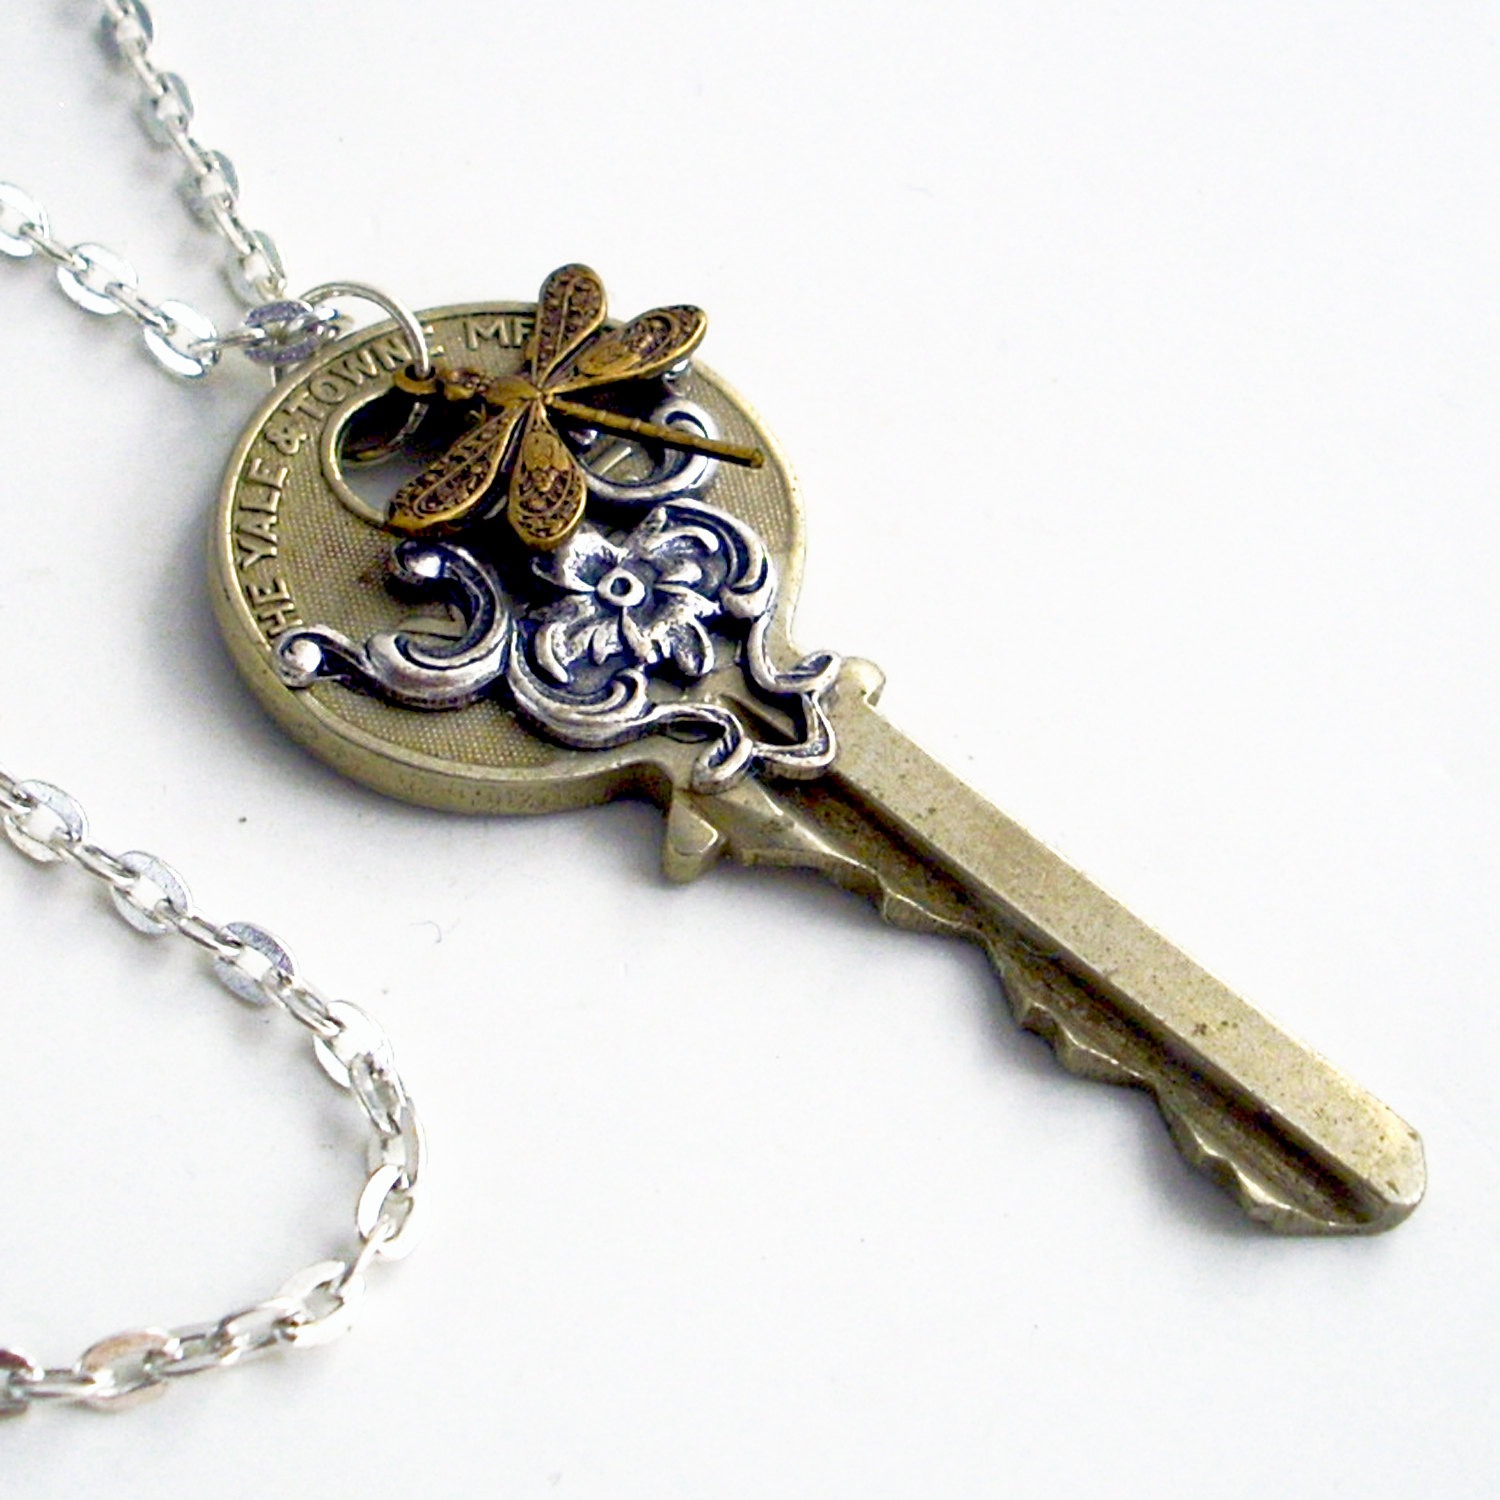 Recycled Dragonfly Key Necklace Dragonfly - Flying Home steampunk buy now online